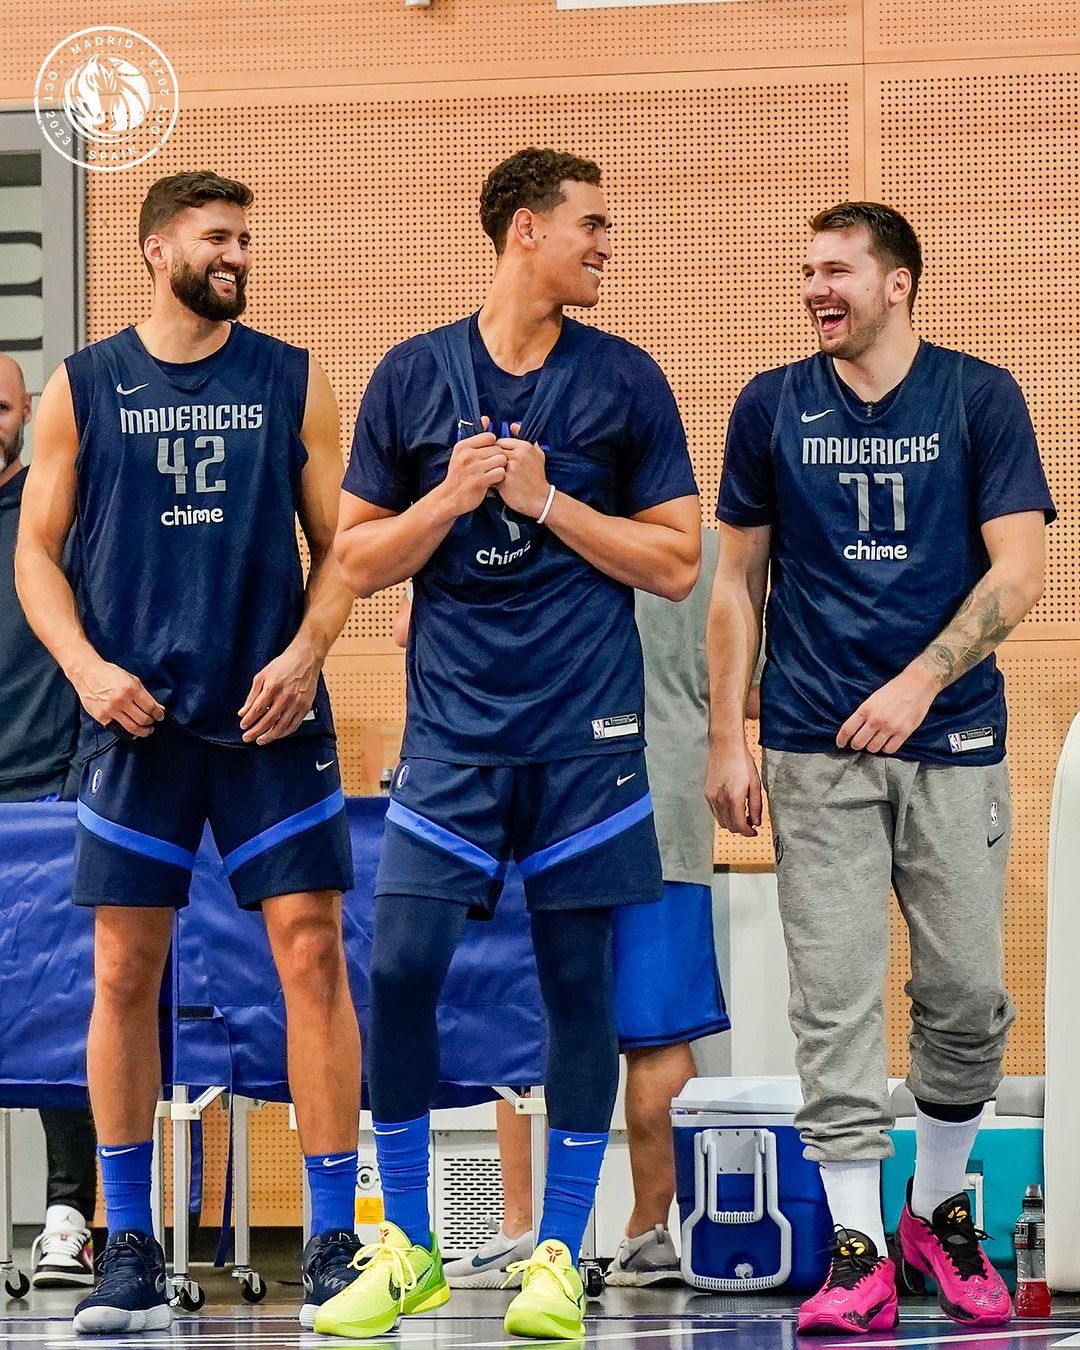 Doncic: “What I’m sure I’ll take is the ham”